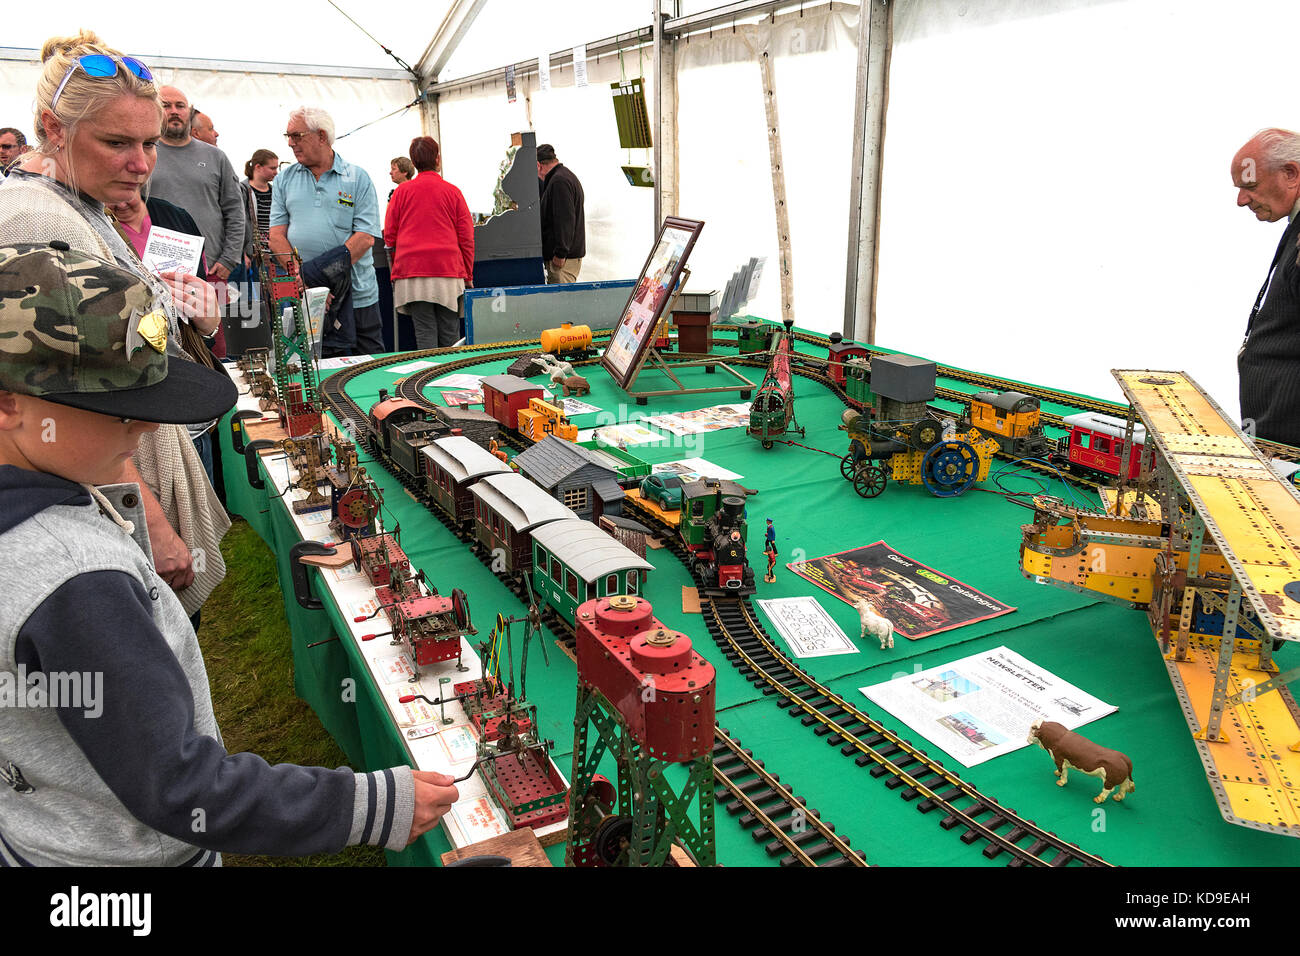 families and enthusiasts at a model railway and meccano models exhibition in cornwall, uk. Stock Photo